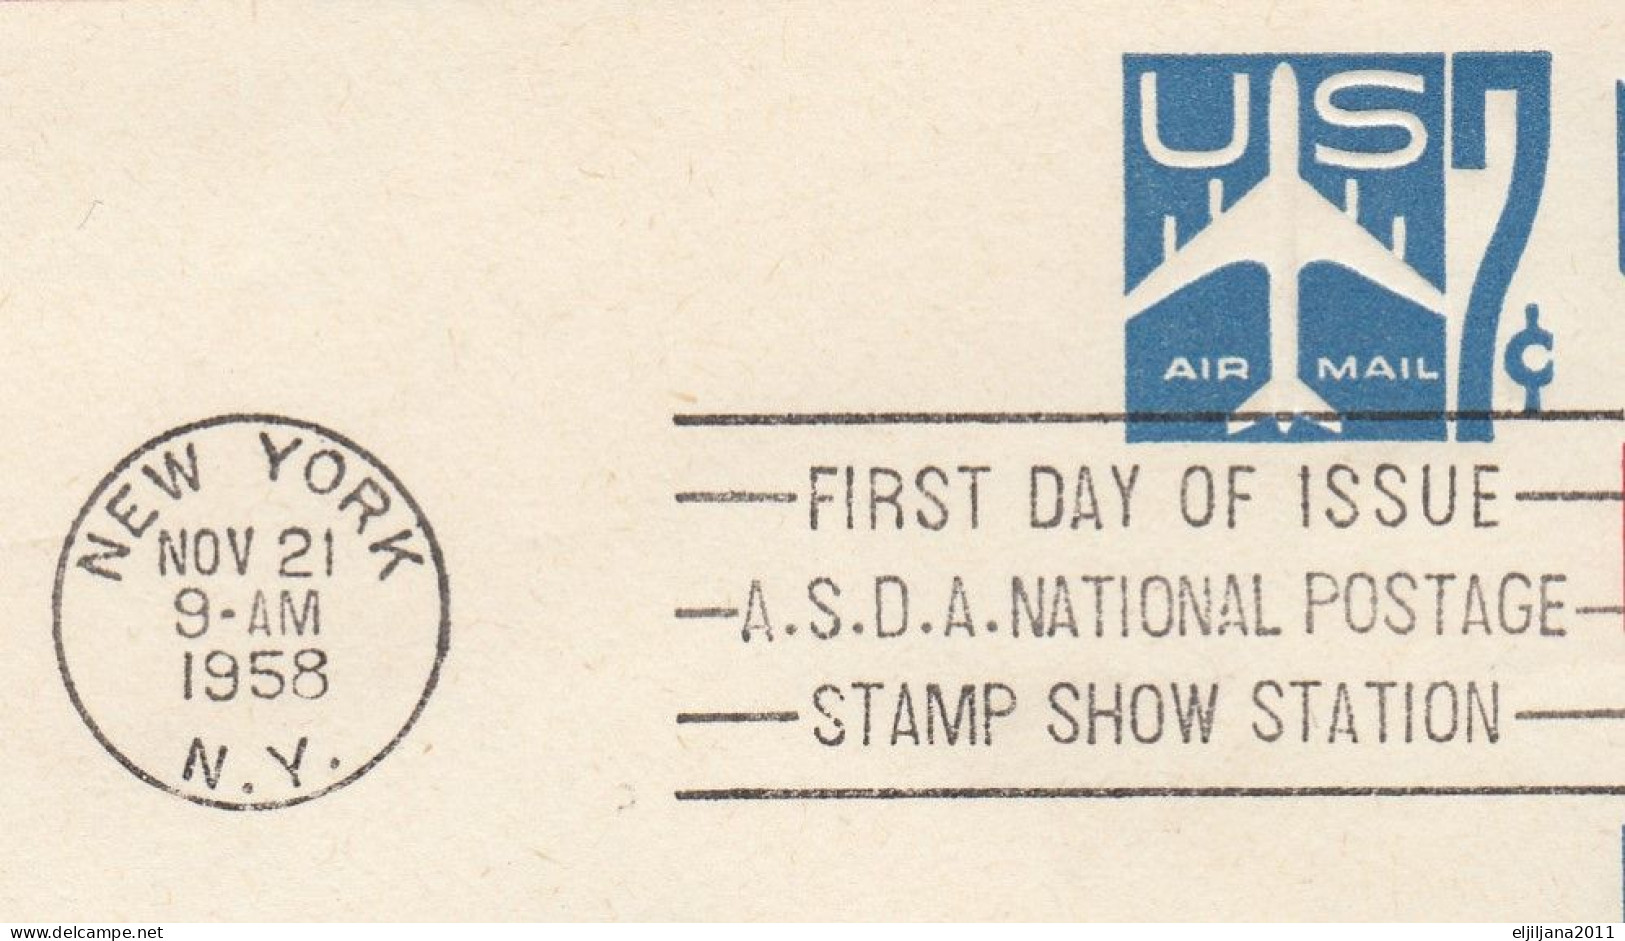 Action !! SALE !! 50 % OFF !! ⁕ USA 1958 ⁕ Air Mail 7c. Jet Airplane / JENNIES To JETS ⁕ FDC Stationery Cover New York - 1951-1960